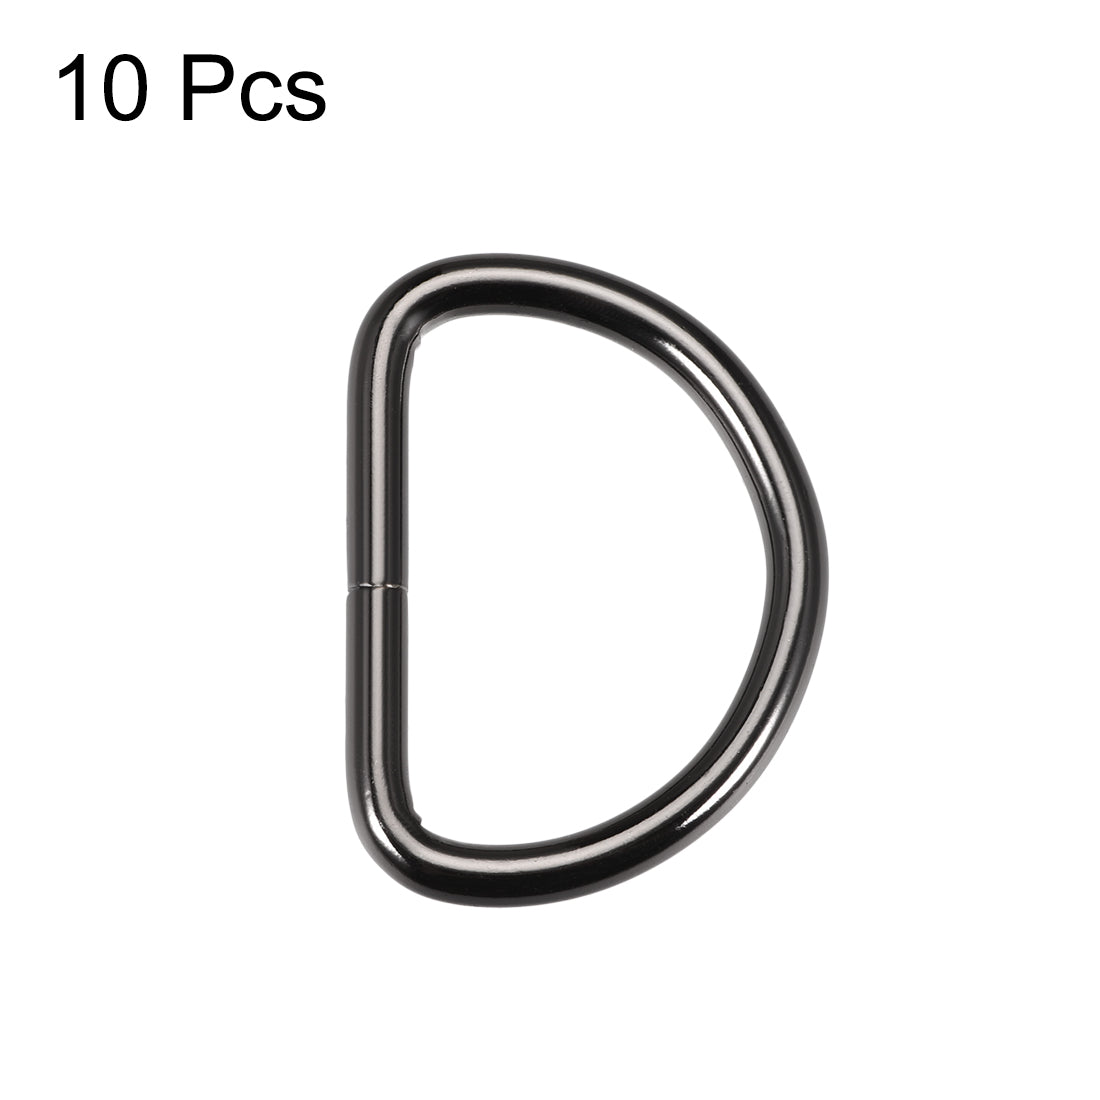 uxcell Uxcell 10 Pcs D Ring Buckle 1.6 Inch Metal Semi-Circular D-Rings Black for Hardware Bags Belts Craft DIY Accessories